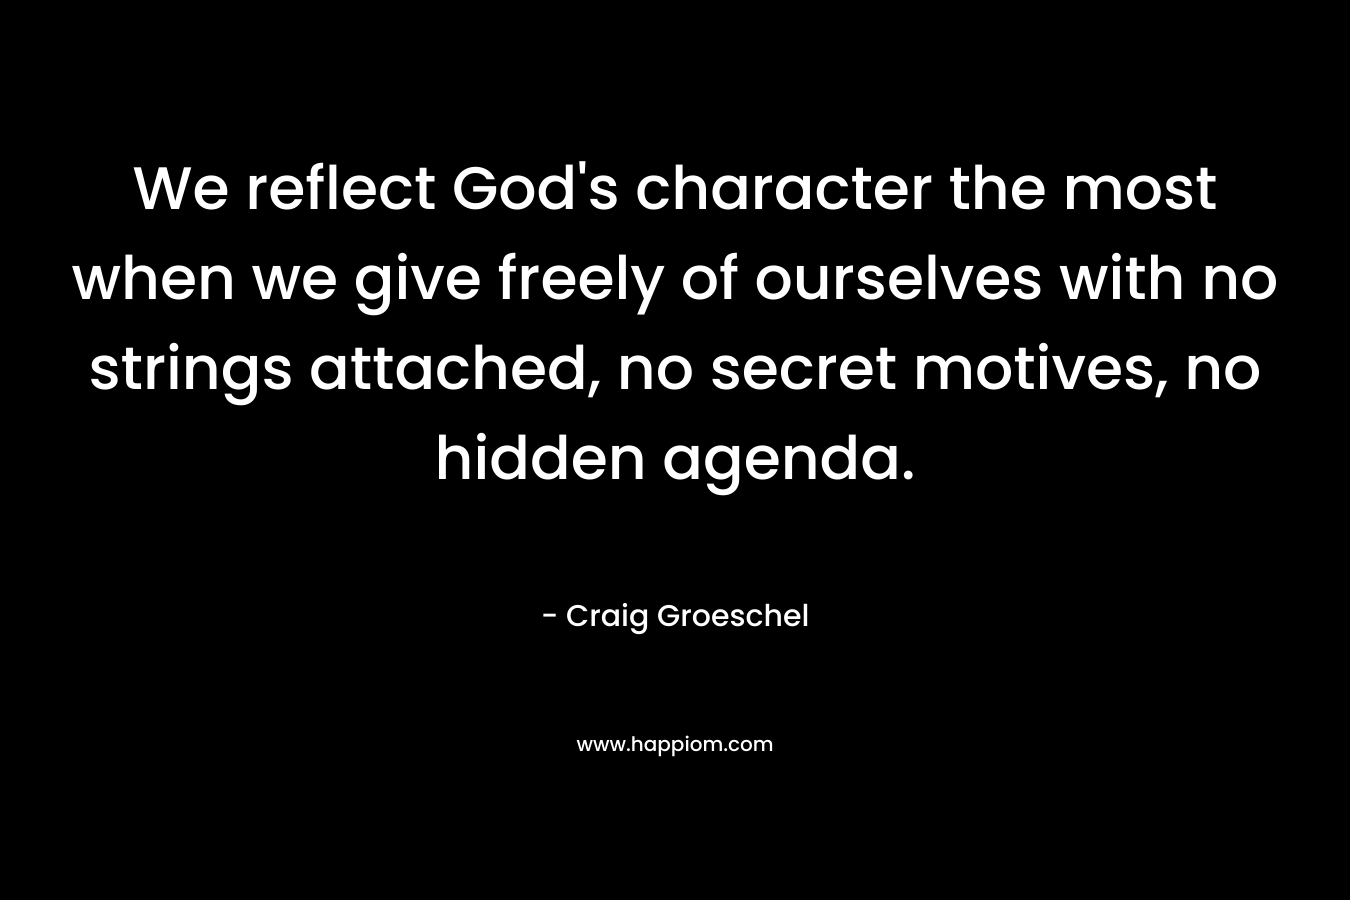 We reflect God’s character the most when we give freely of ourselves with no strings attached, no secret motives, no hidden agenda. – Craig Groeschel